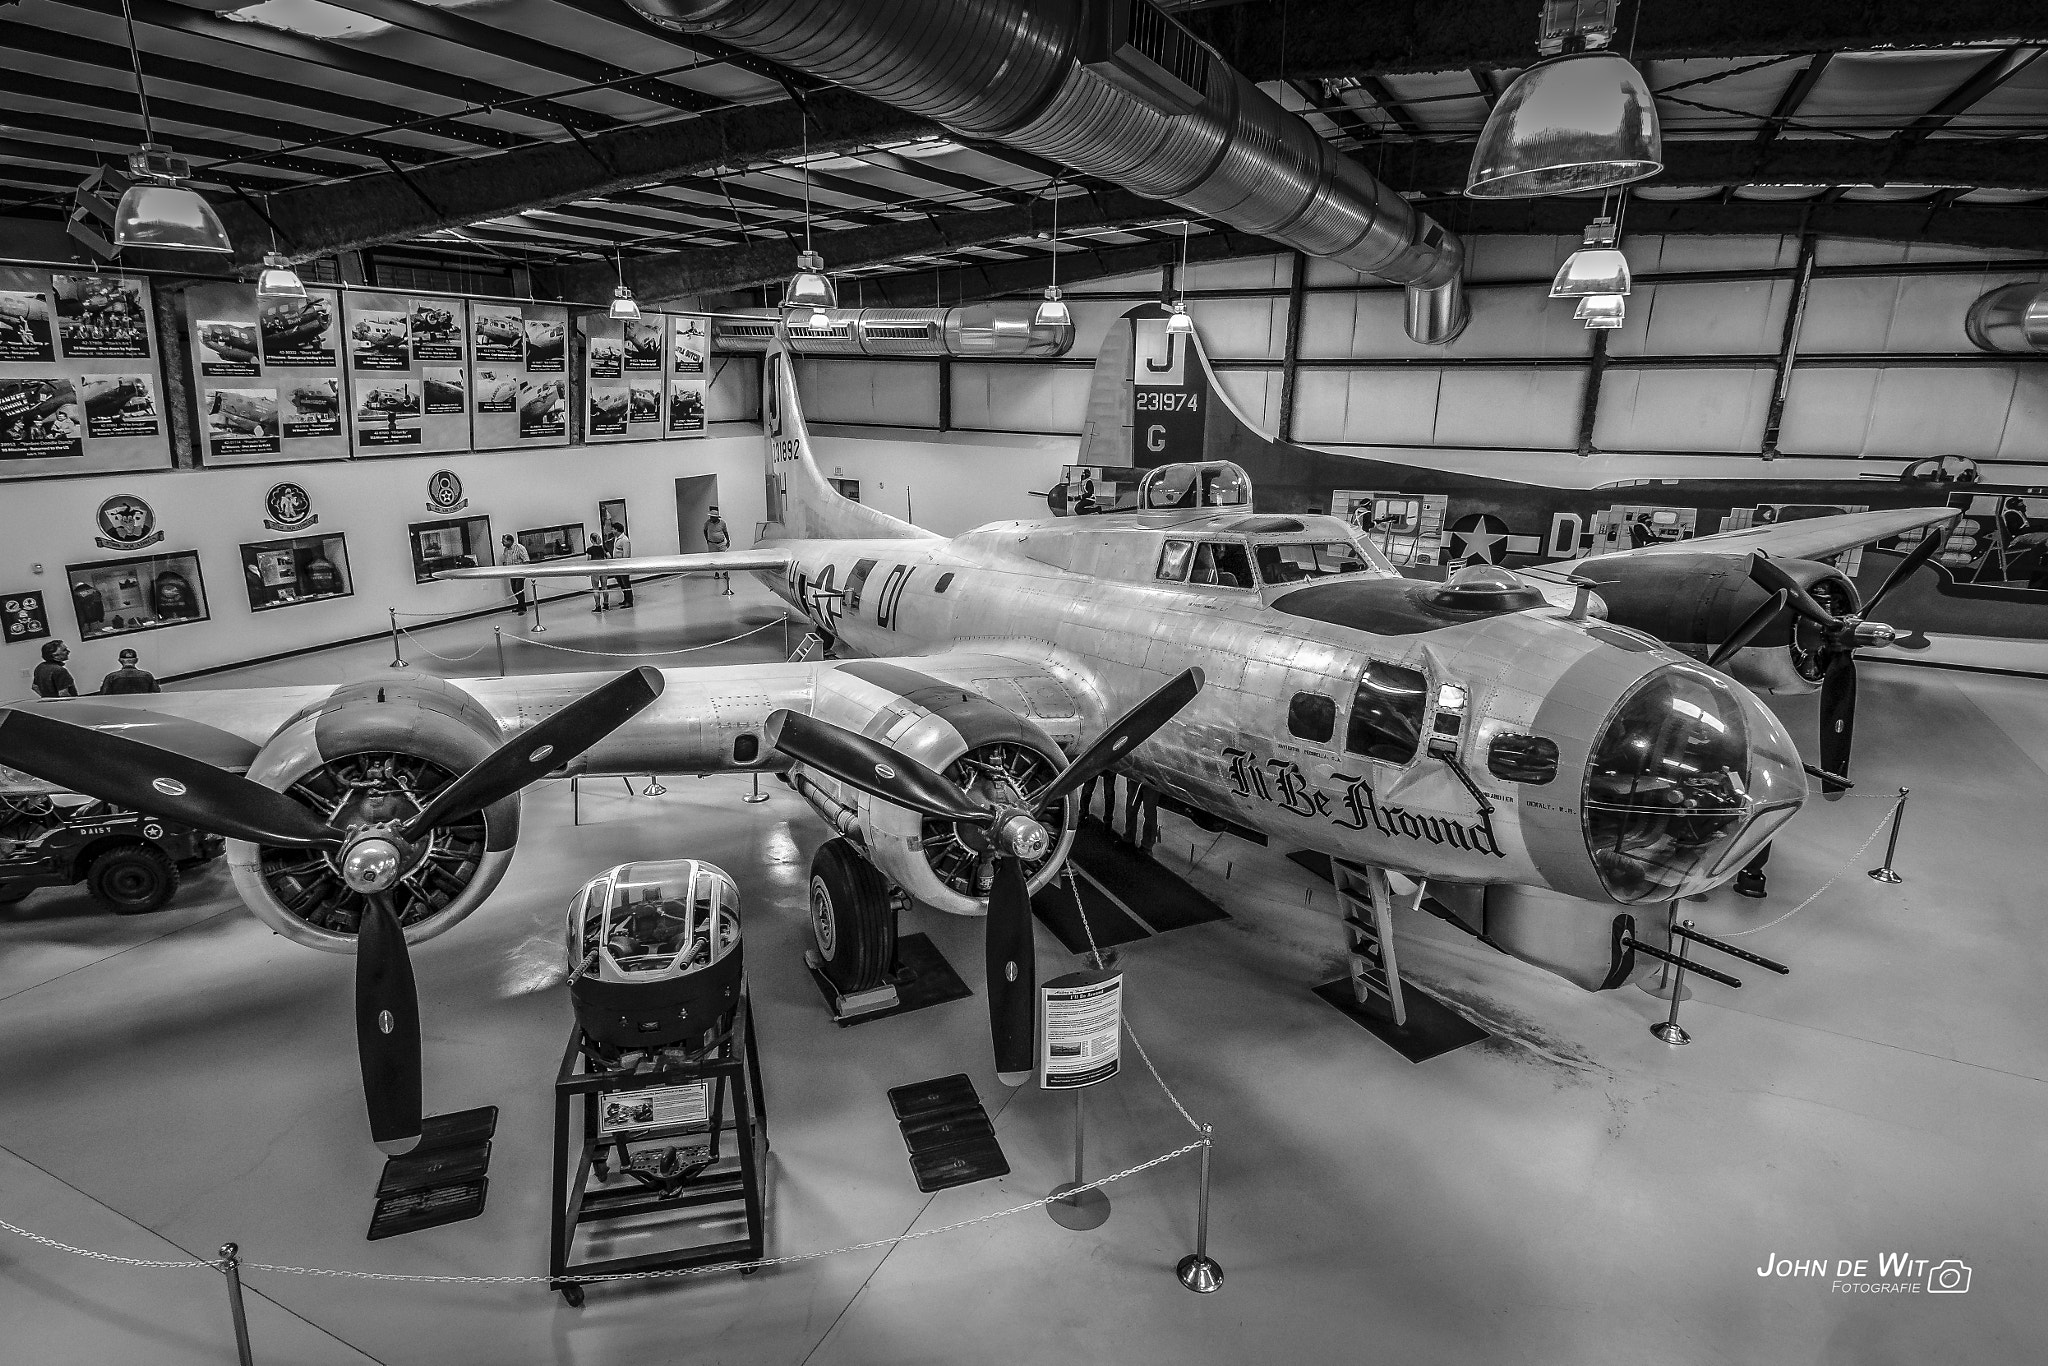 Canon EOS 60D sample photo. The b-17 "flying fortress" photography